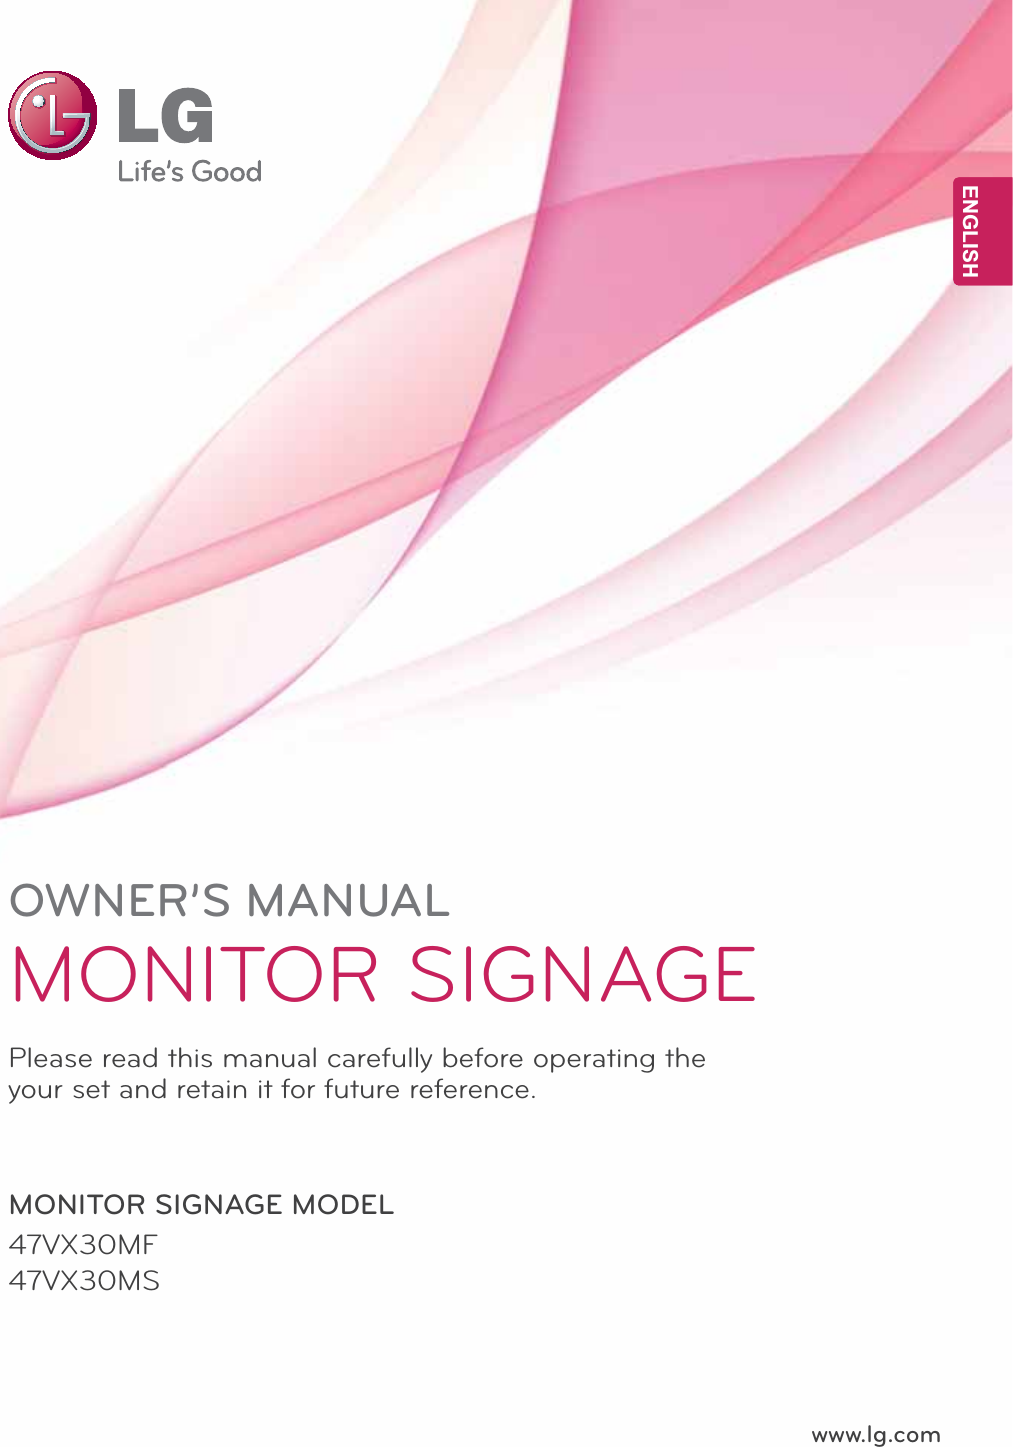 www.lg.comOWNER’S MANUALMONITOR SIGNAGE 47VX30MF47VX30MSPlease read this manual carefully before operating the your set and retain it for future reference.MONITOR SIGNAGE MODEL